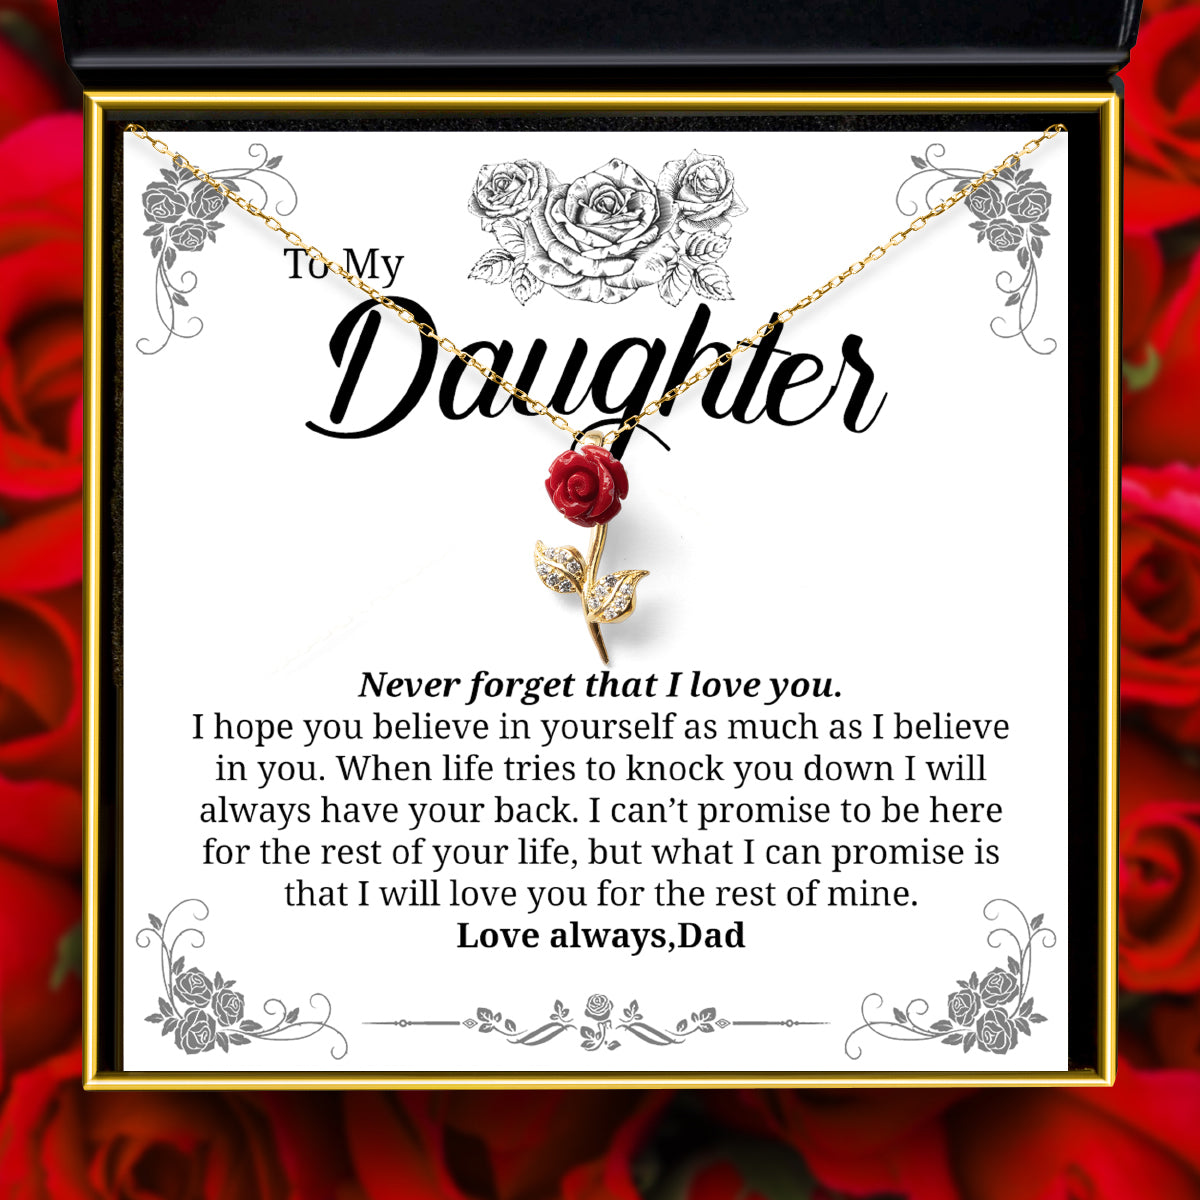 To My Daughter. Never Forget (From Dad) - Red Rose Necklace Gift Set